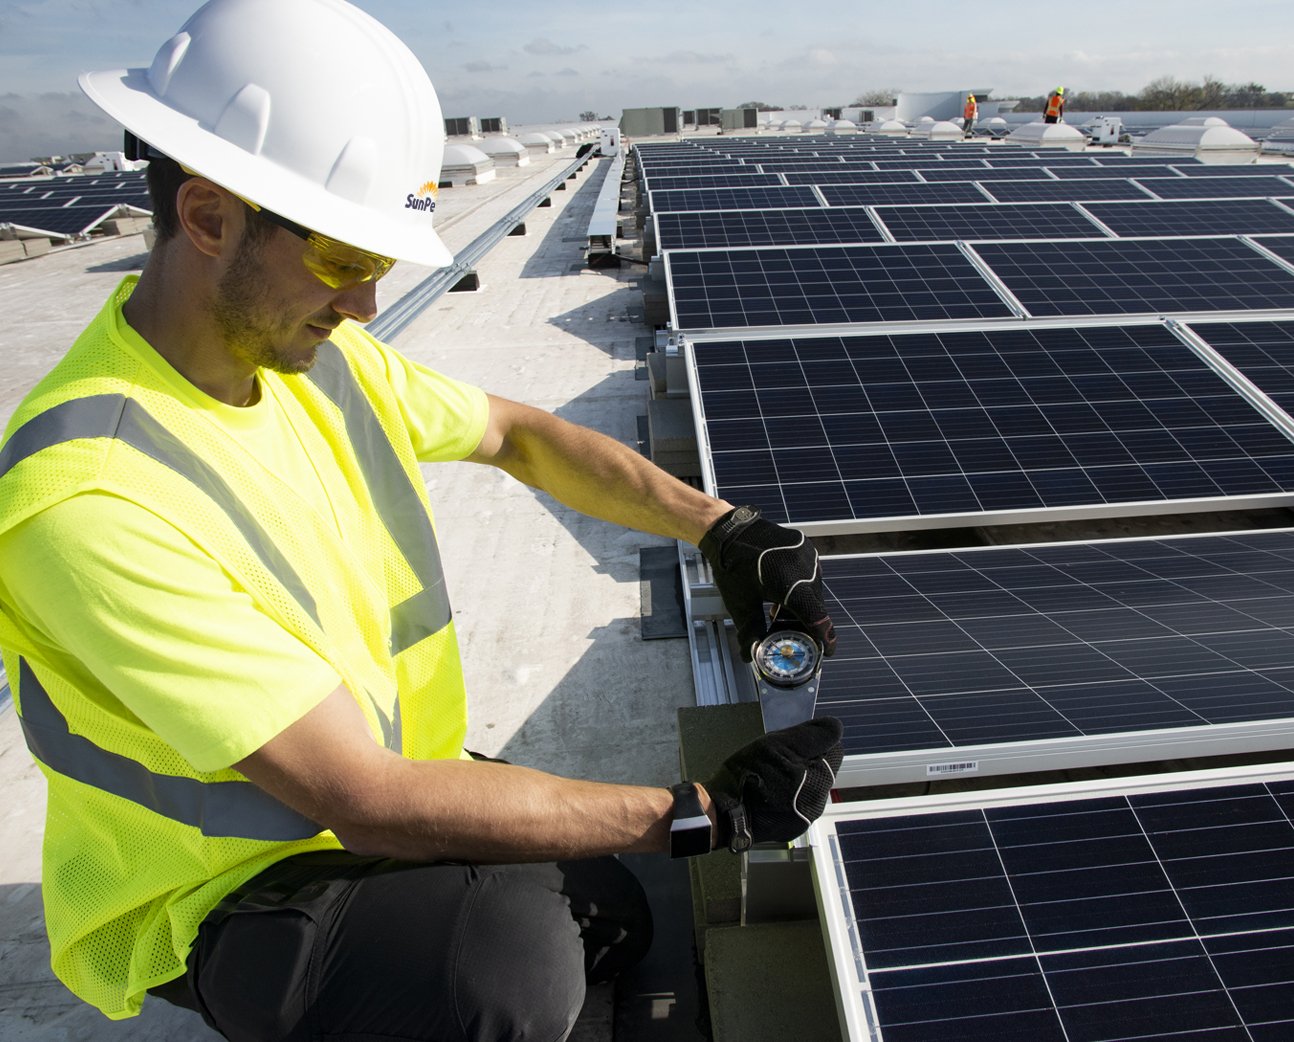 A member of SunPeak’s installation team on a jobsite, representing SunPeak’s work as a commercial solar installation company.